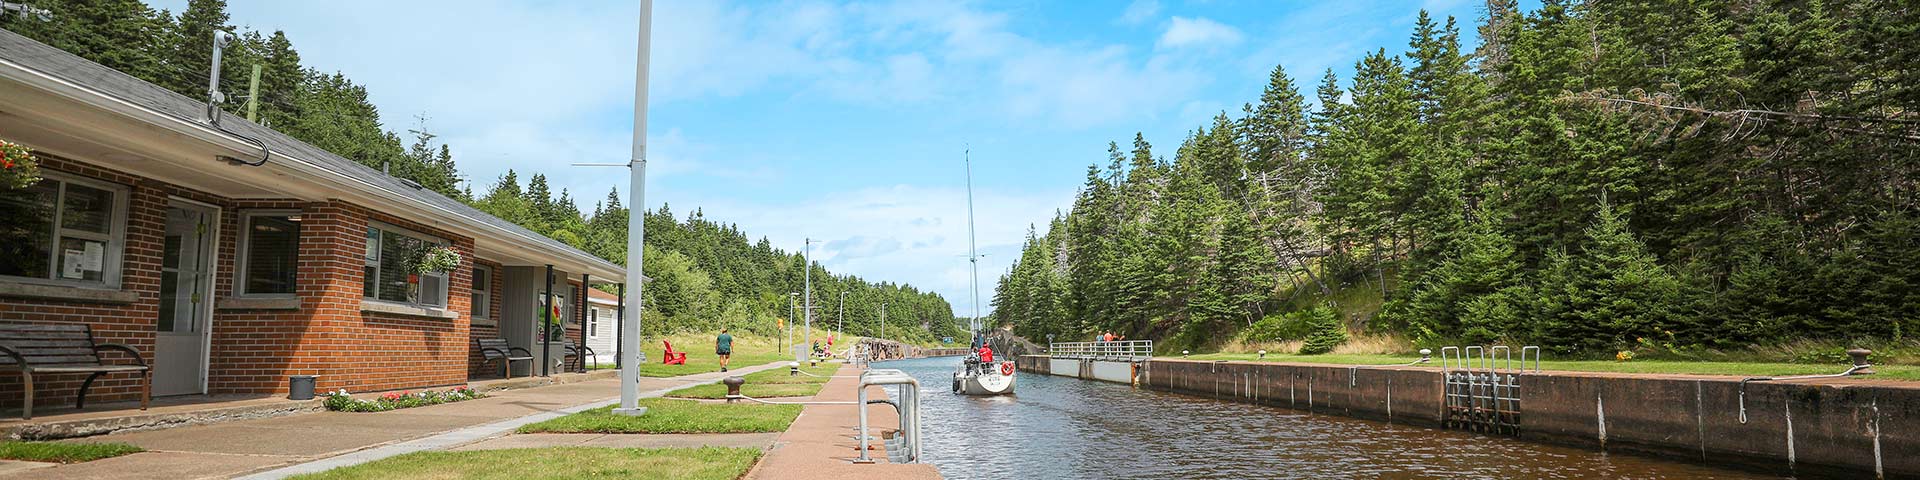 A sailboat passes through St. Peters Canal